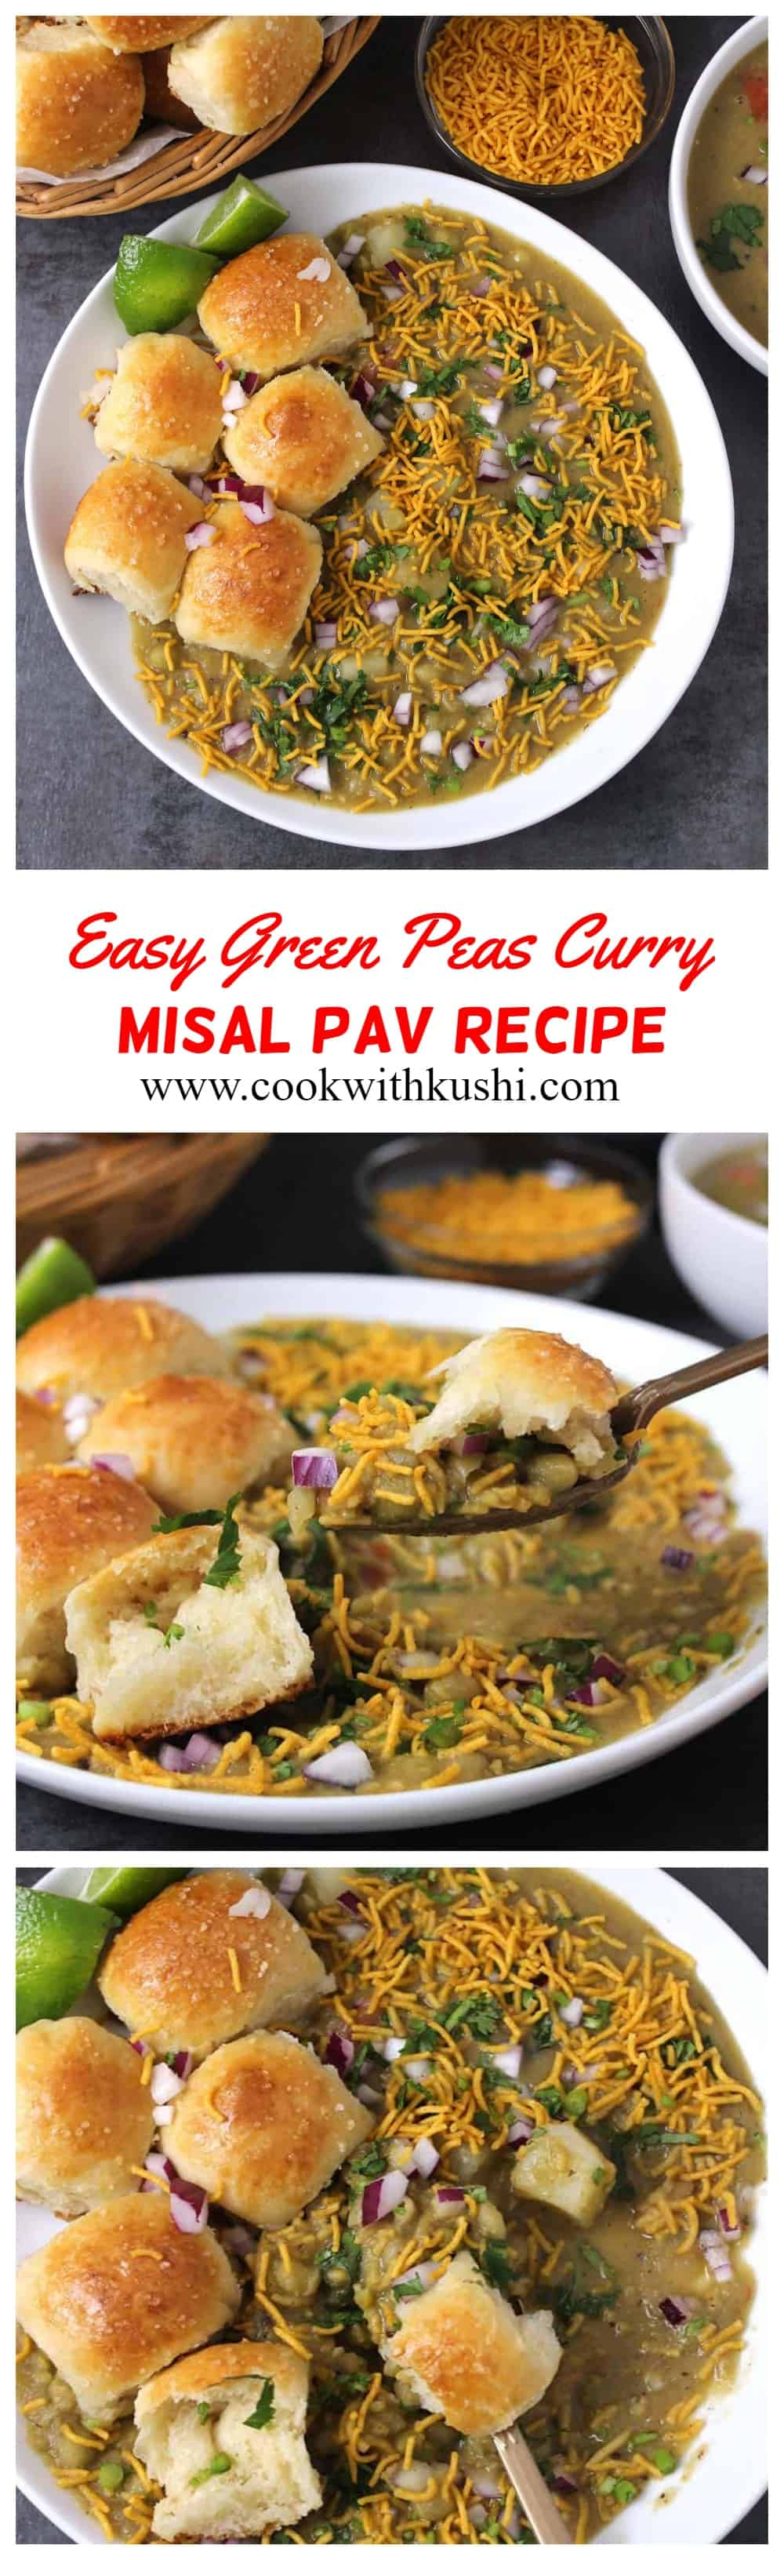 Misal Pav is a spicy and flavorful, nutritious and protein pack dish from Mumbai served with ladi pav bun, Indian dinner rolls. #lentils #legumes #splitpeas #greenpeas #Indianrecipes #Misalpav #streetfood #Vegna #Instantpot